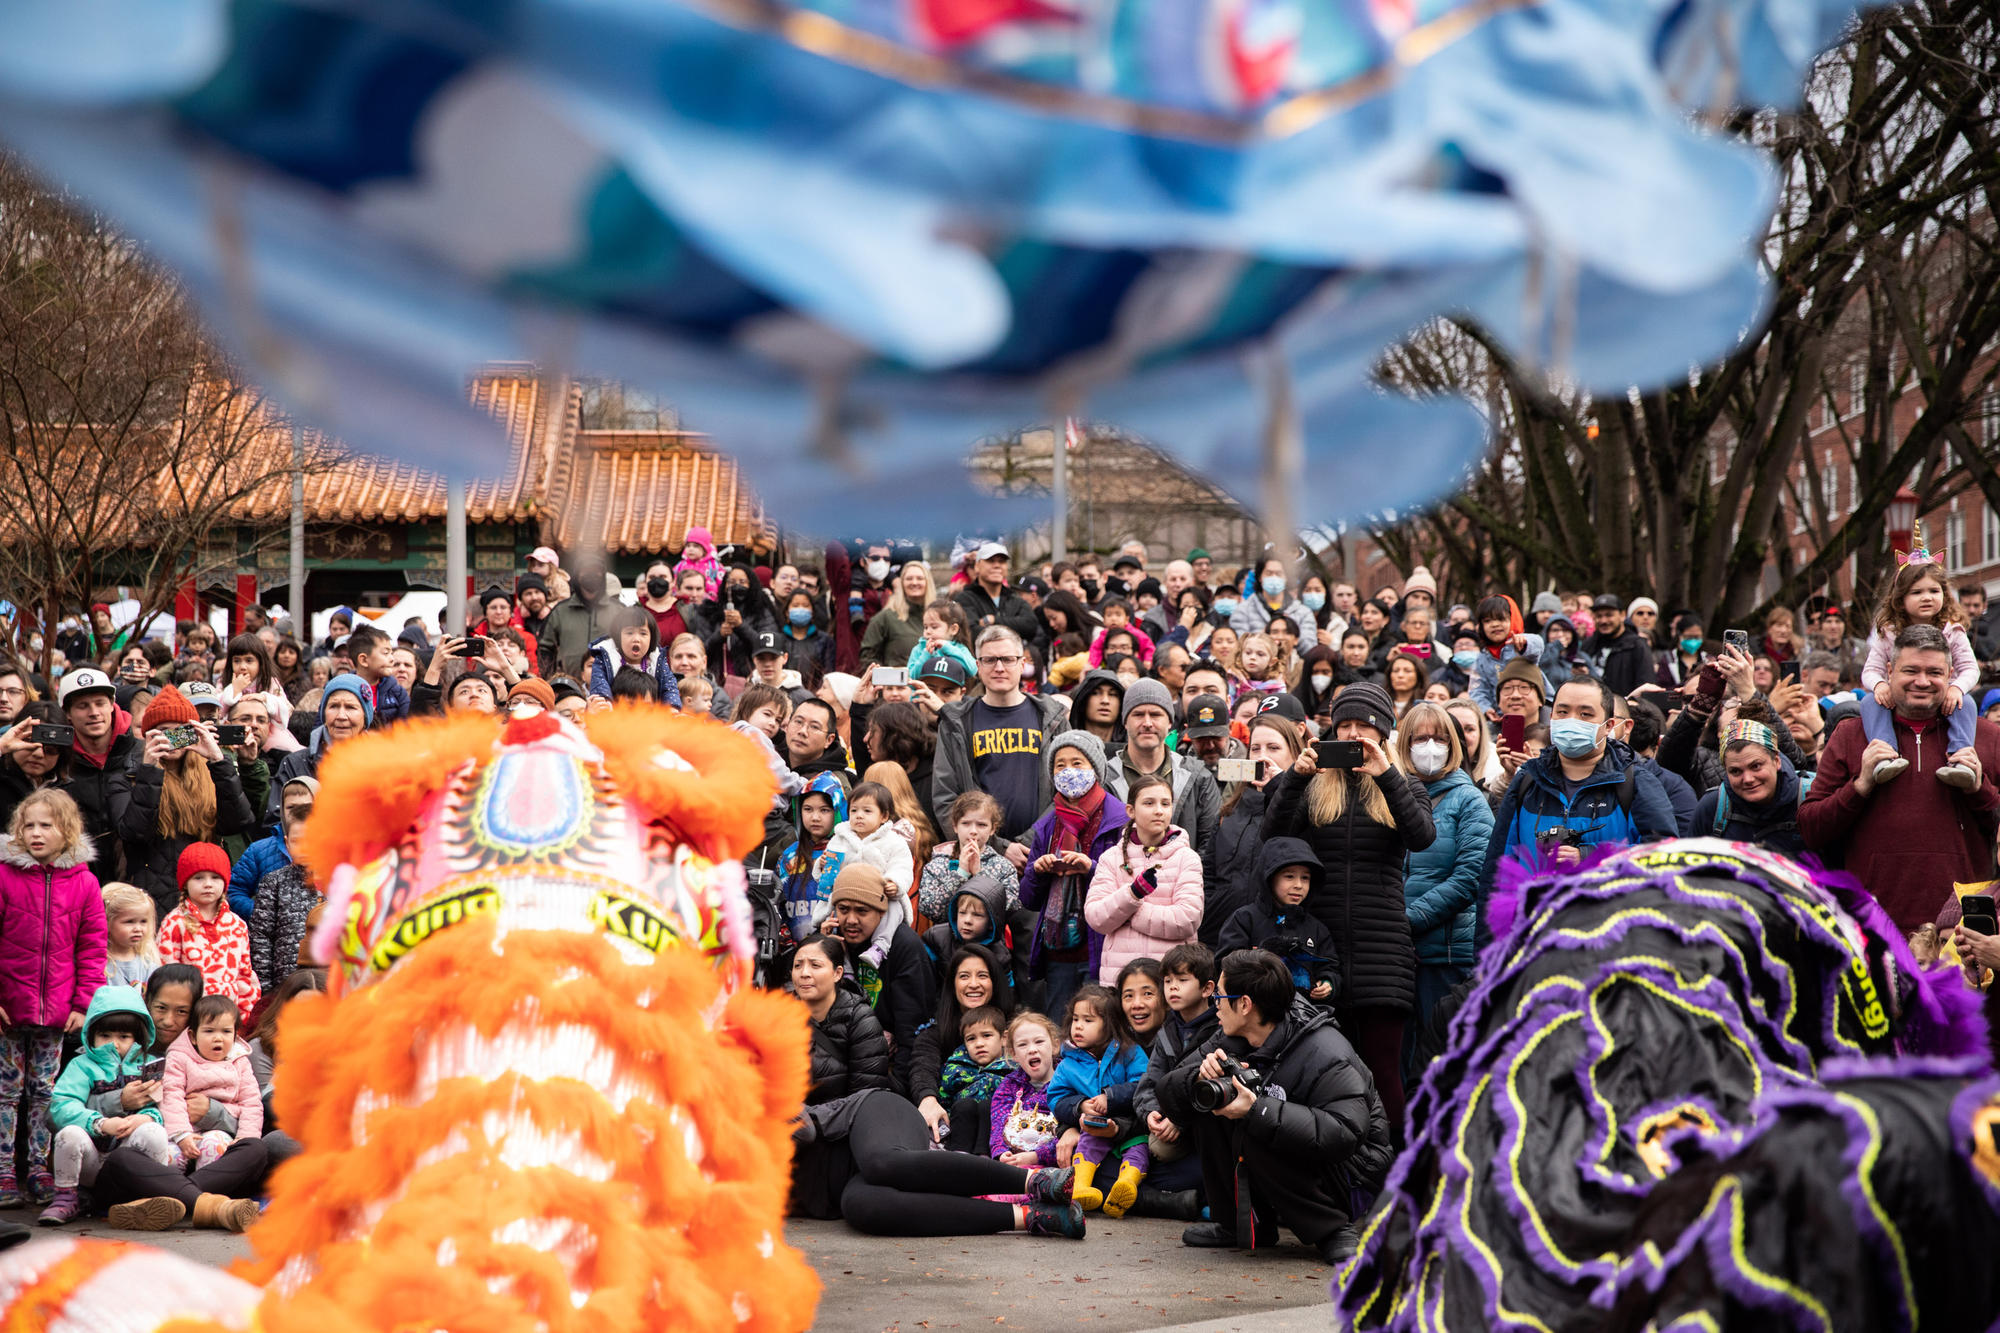 A crowd of people watches as three Lunar New Year lions perform